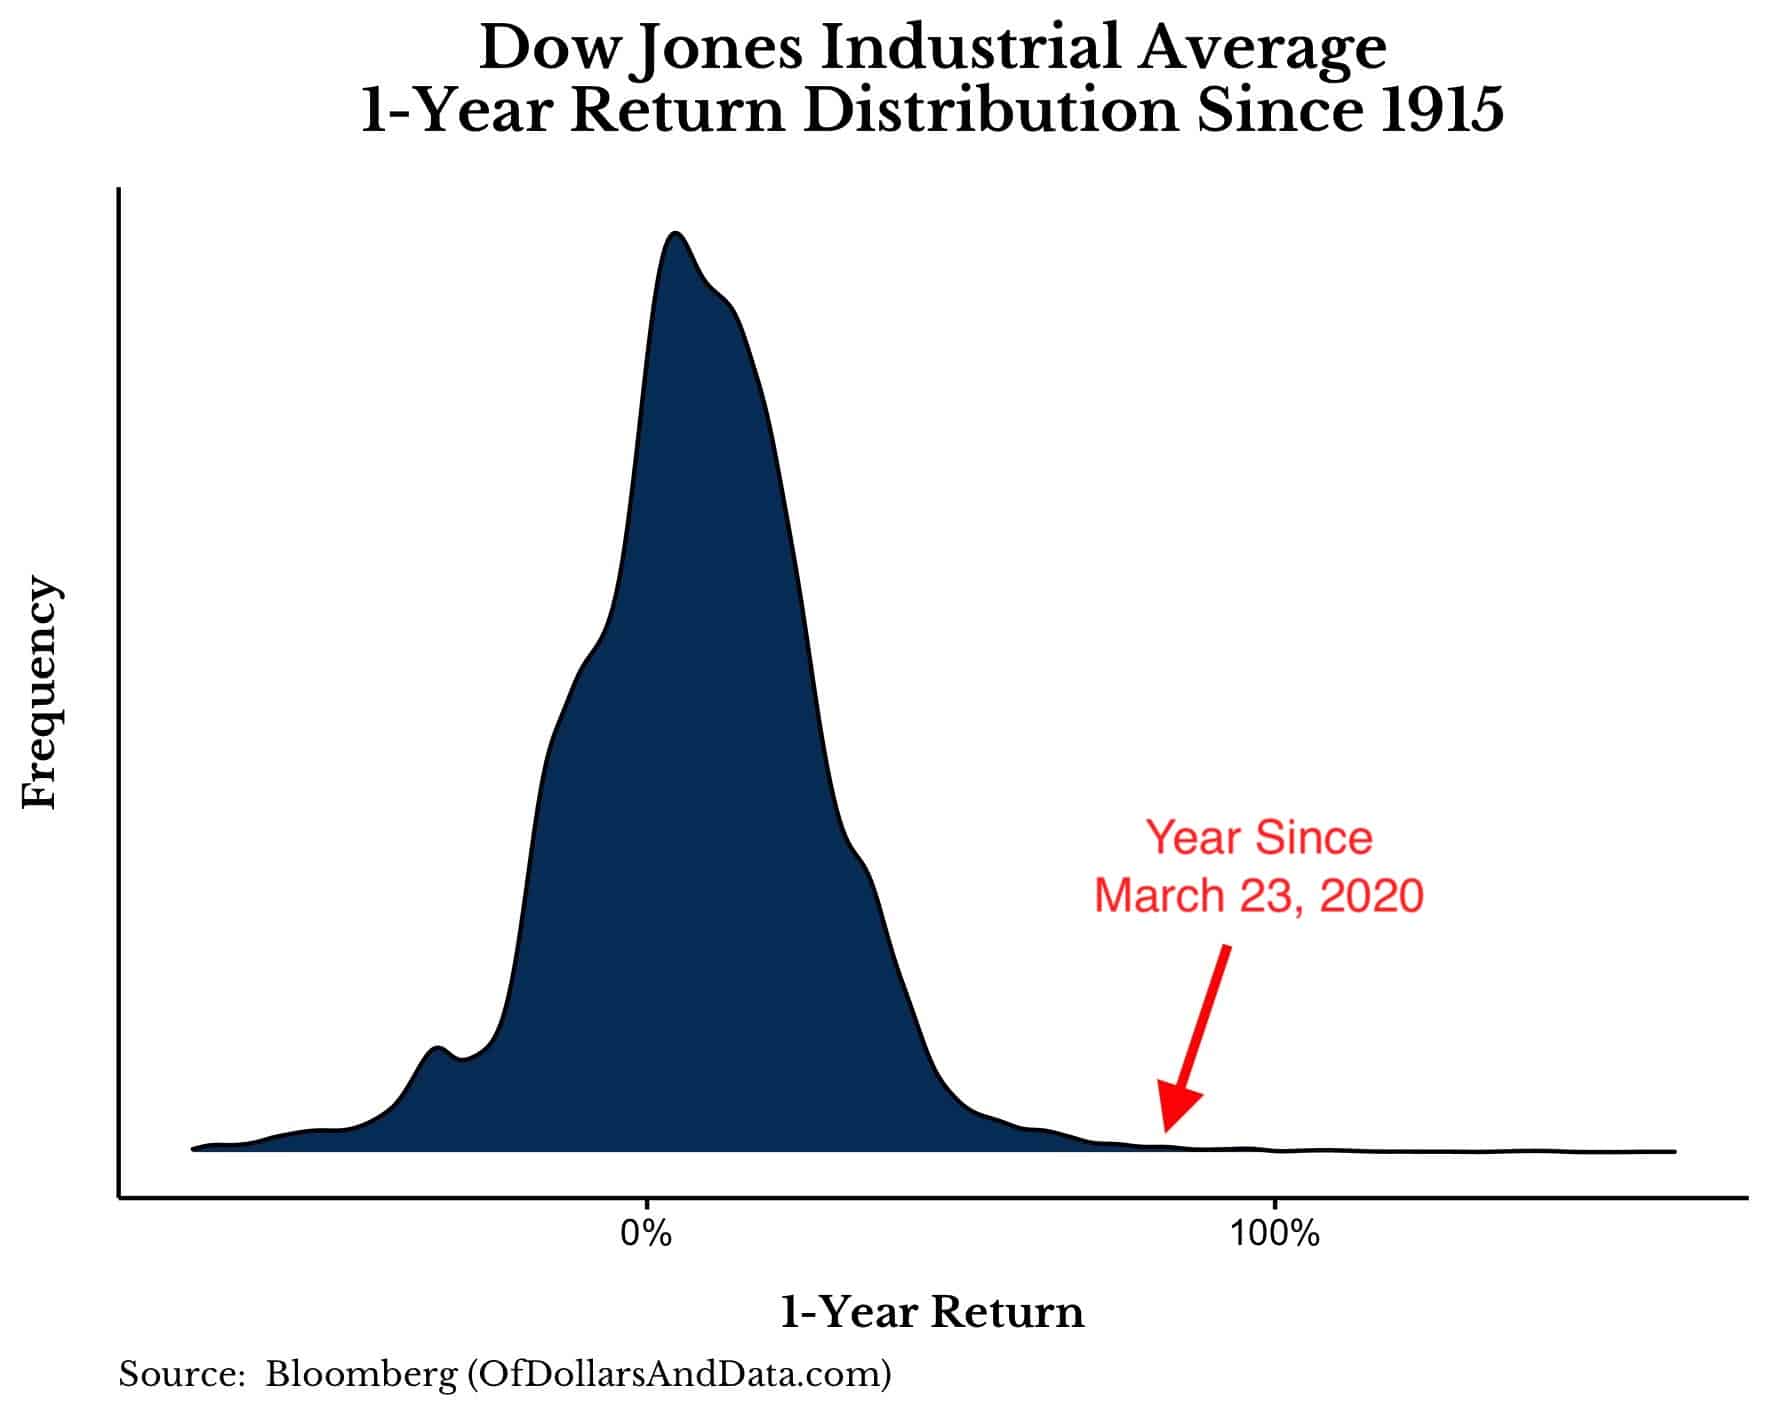 Dow 1-year return distribution since 1915 highlighting the year since March 23, 2020 as an extreme outlier